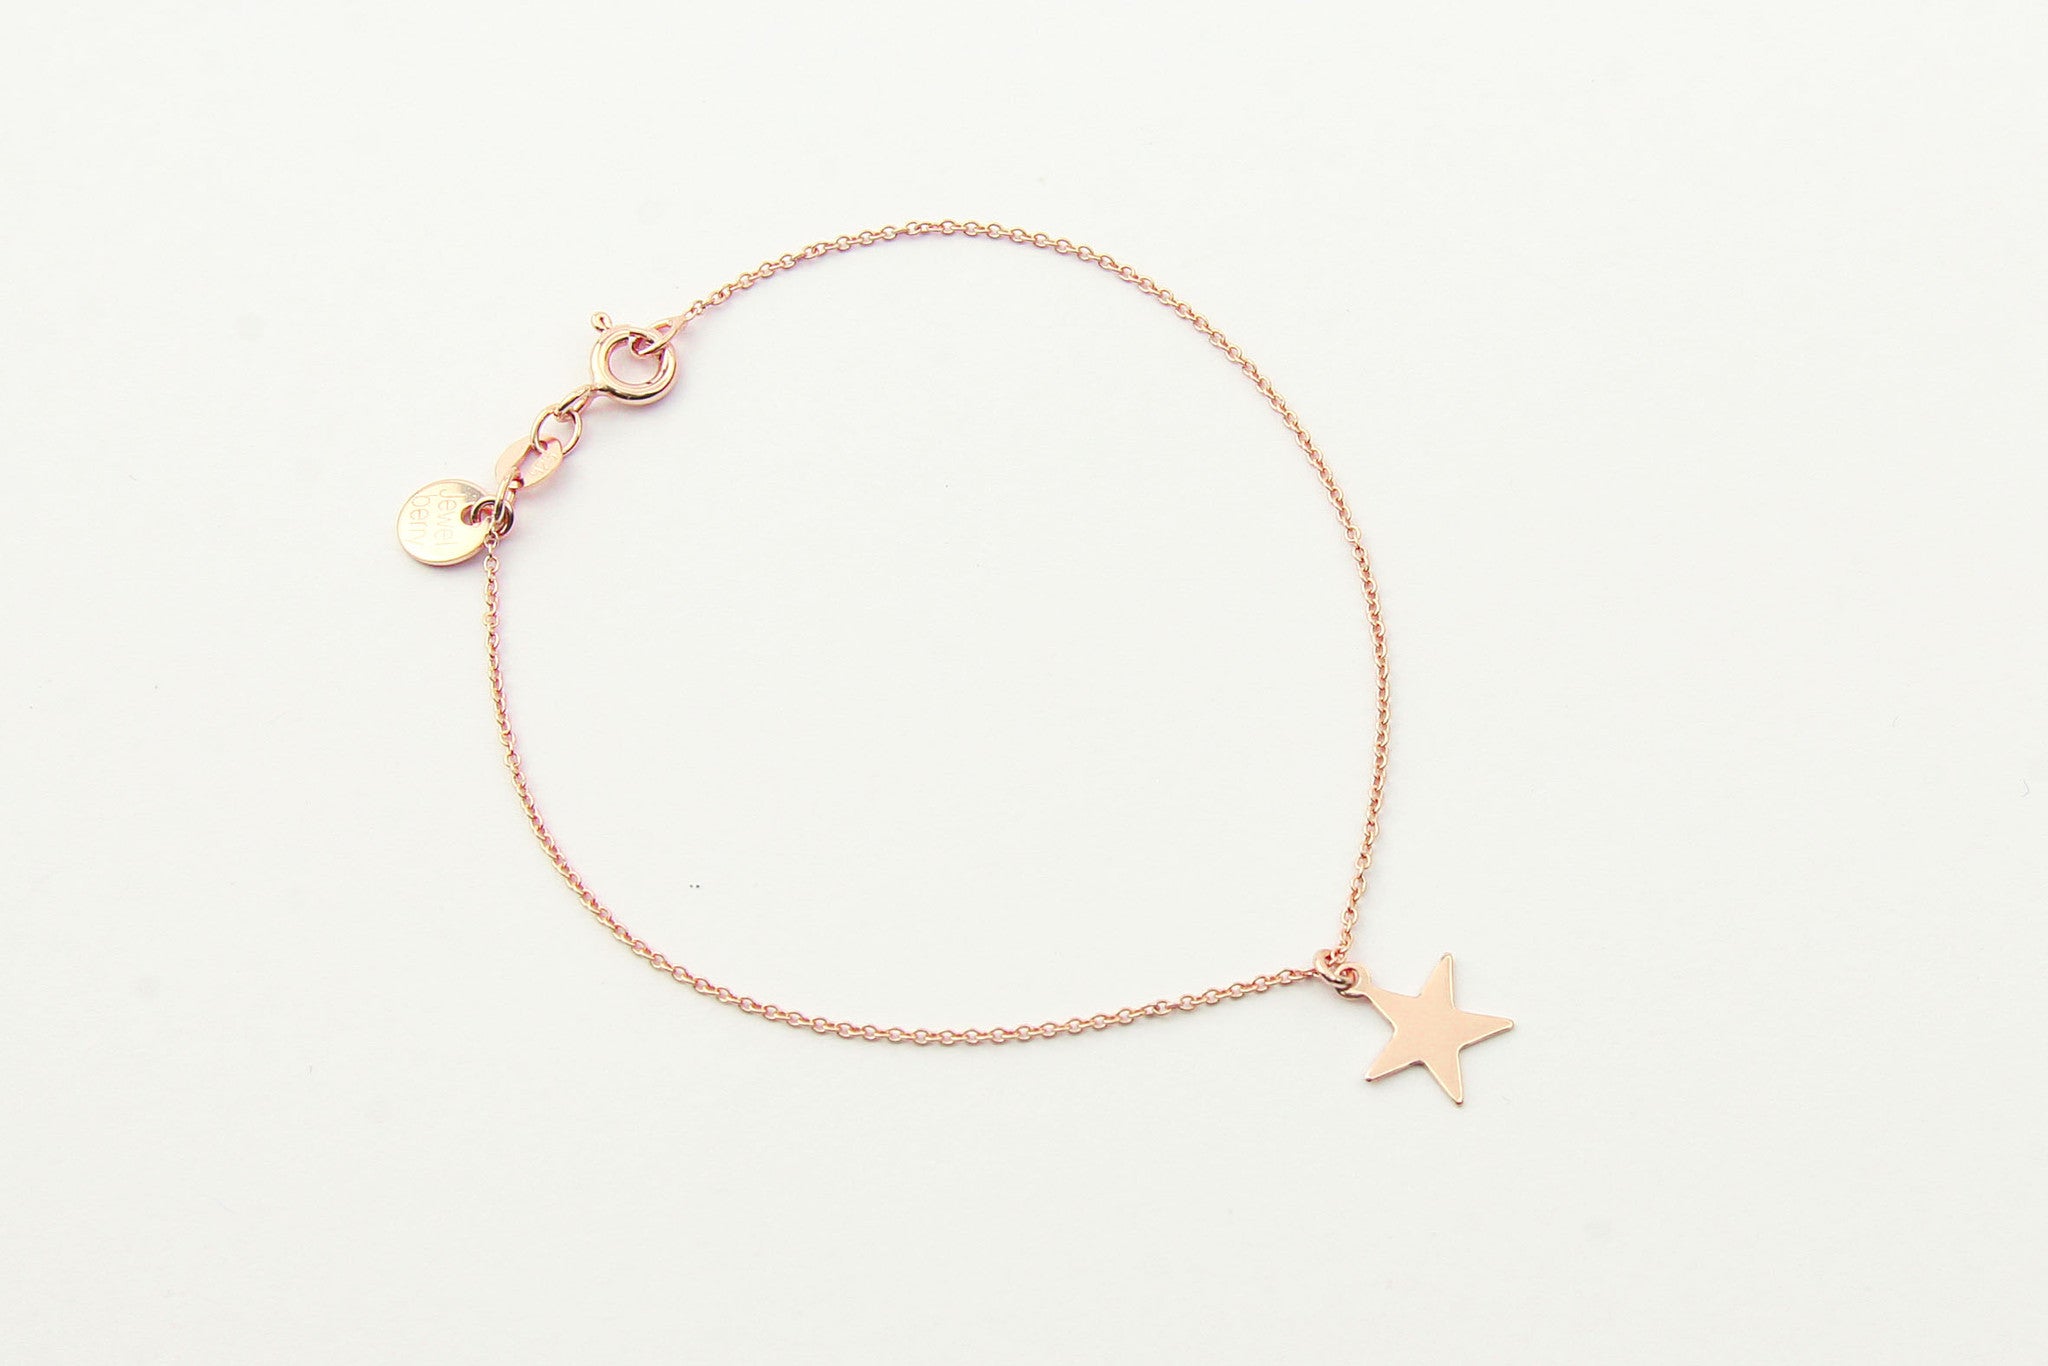 jewelberry armband bracelet plain star rose gold plated sterling silver fine jewelry handmade with love fairtrade anchor chain